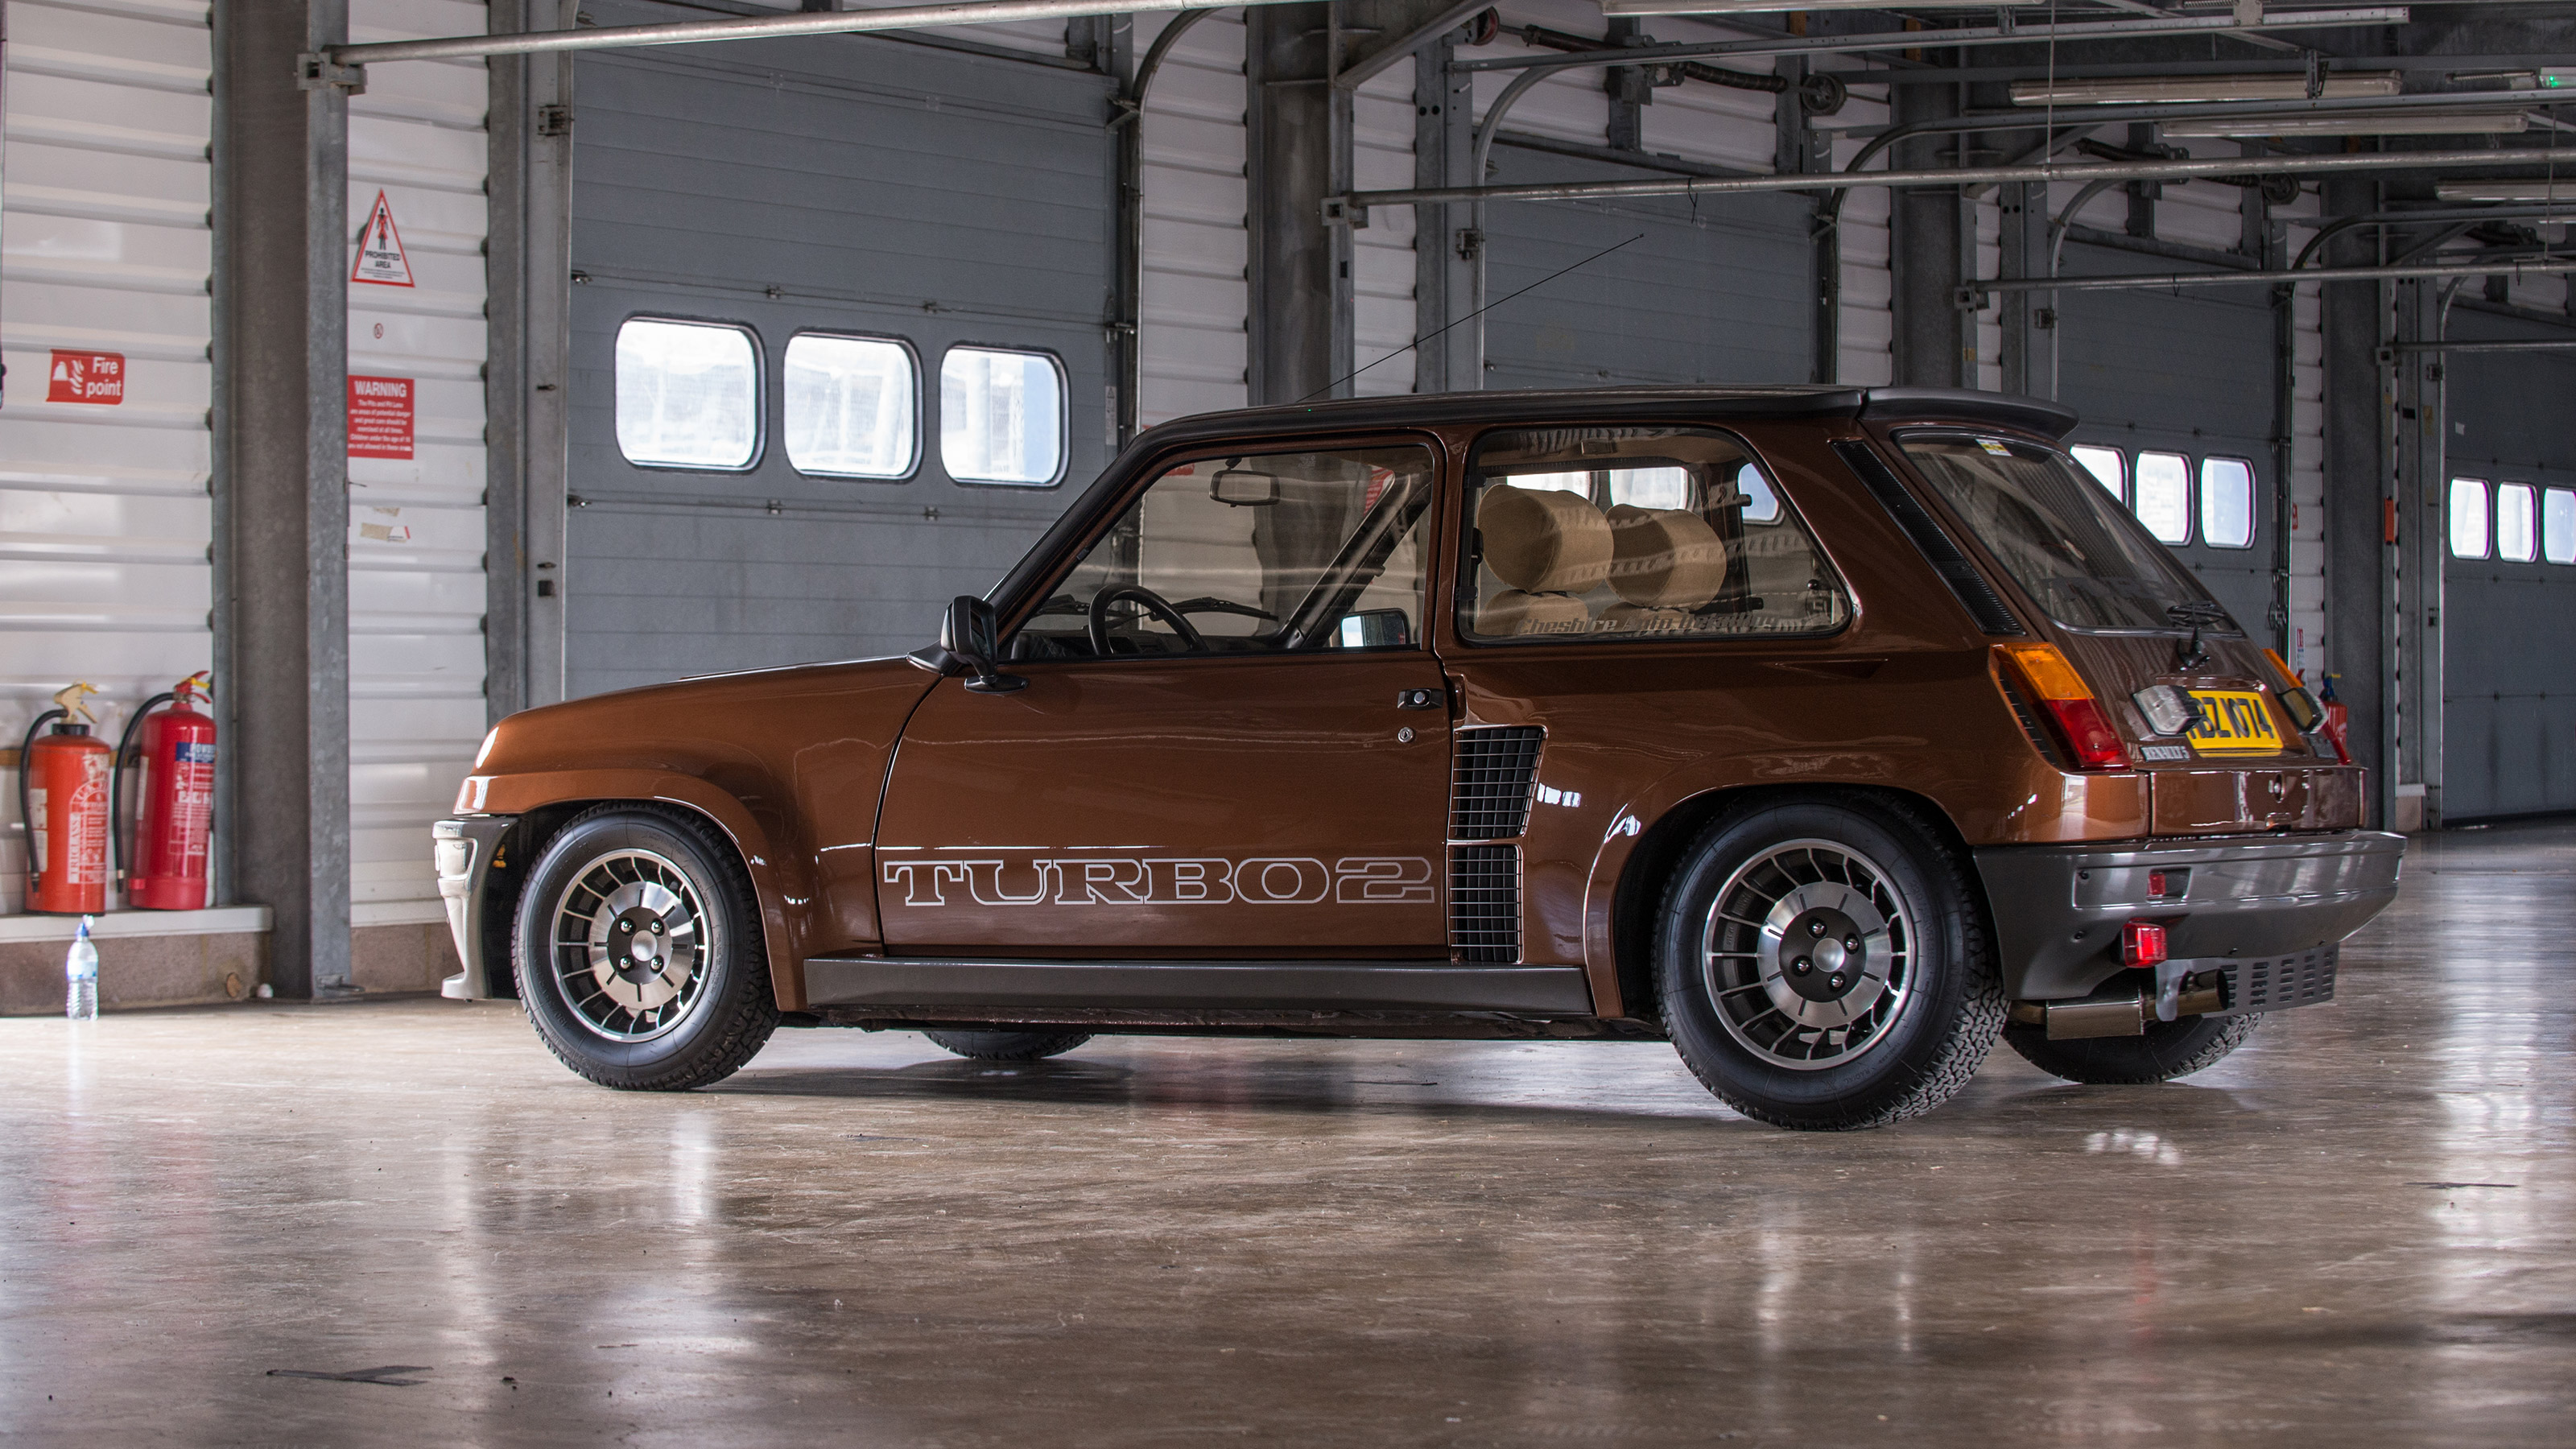 Renault 5 Turbo reborn with 400-hp engine and carbon fiber body